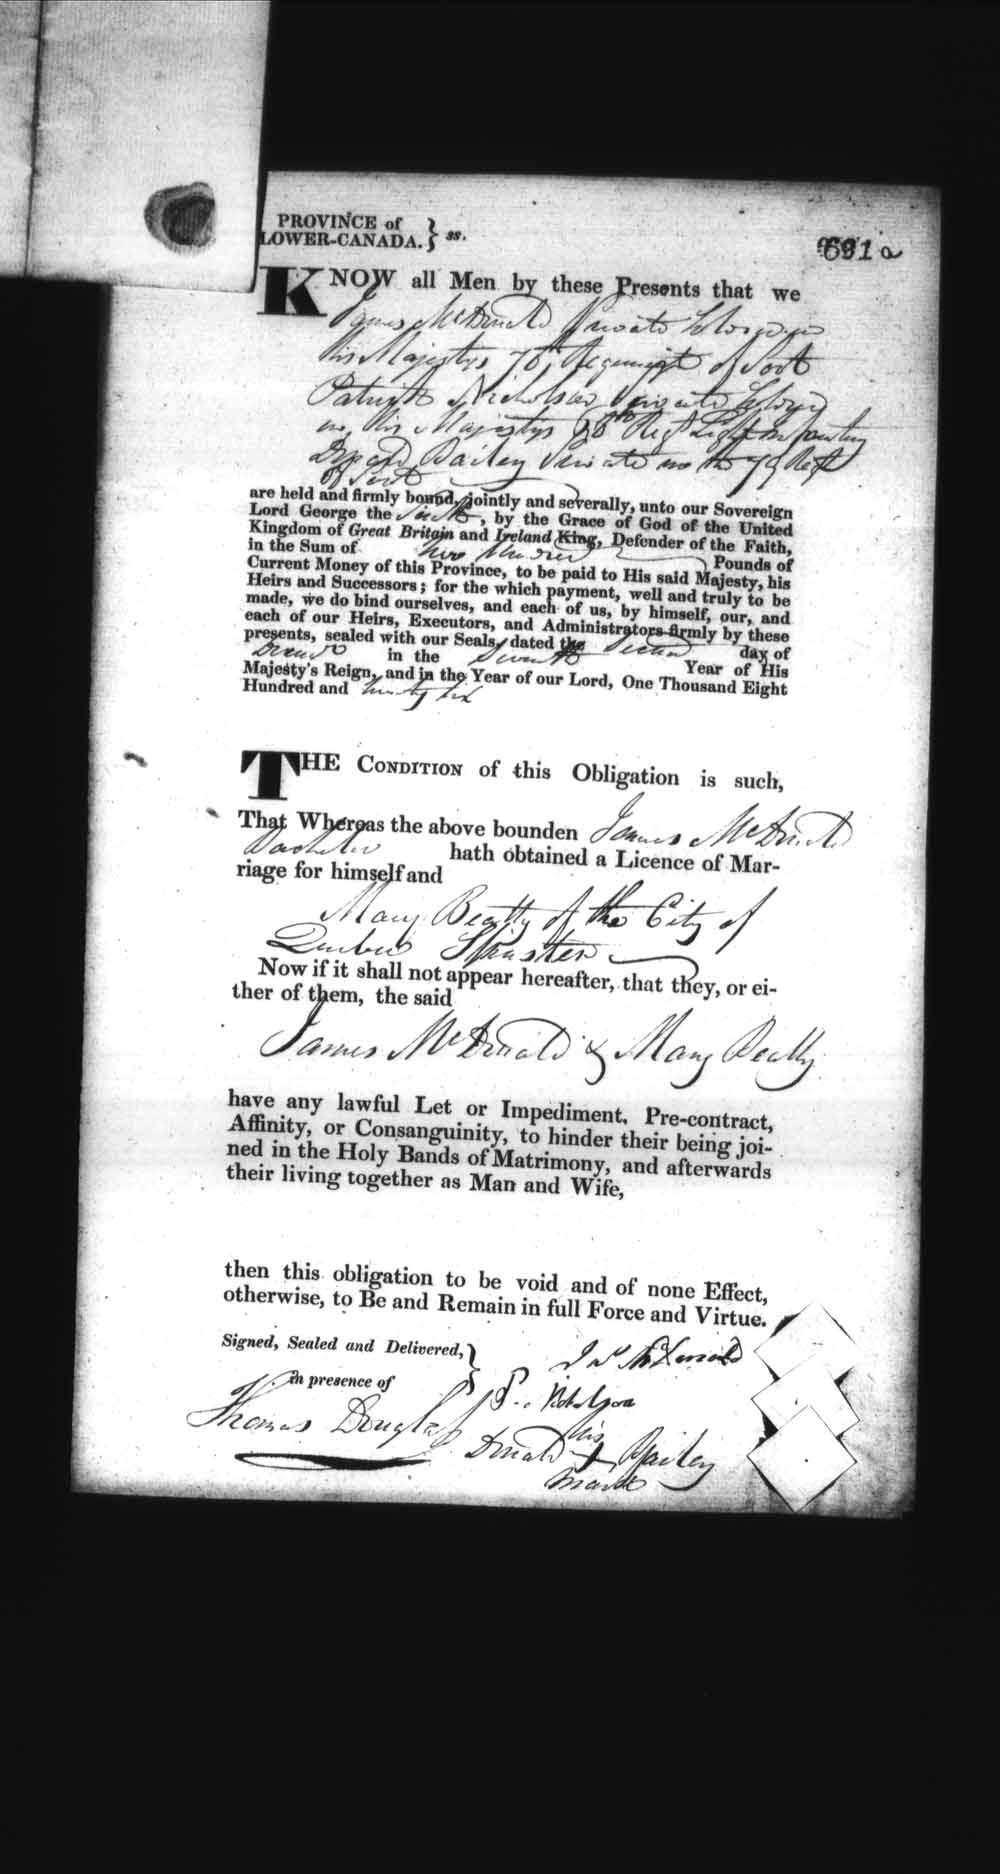 Digitized page of Upper and Lower Canada Marriage Bonds (1779-1865) for Image No.: e008236739